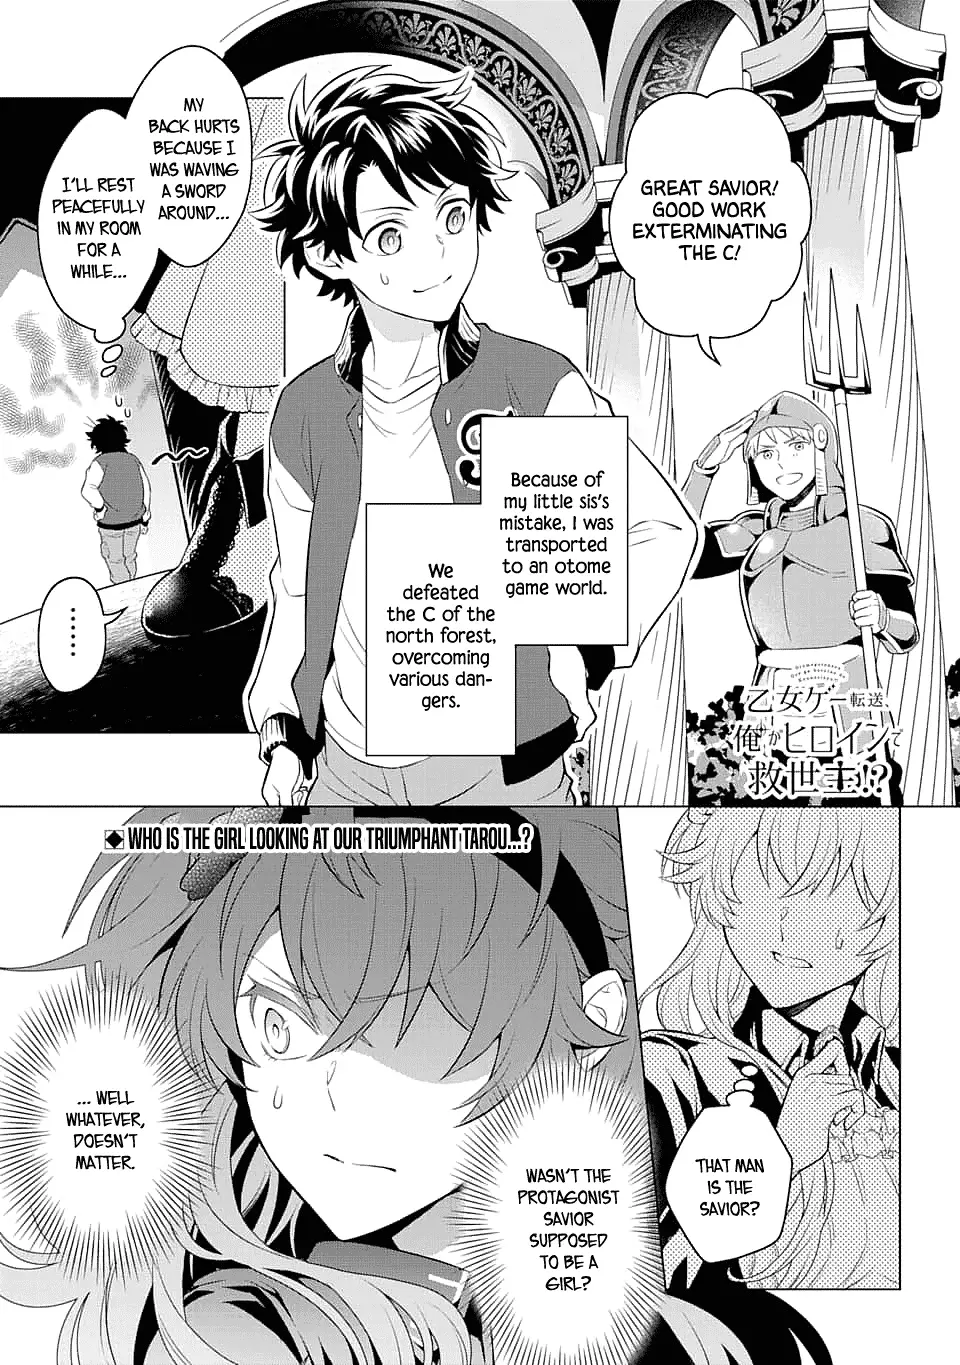 Transferred To Another World, But I'm Saving The World Of An Otome Game!? - 10 page 1